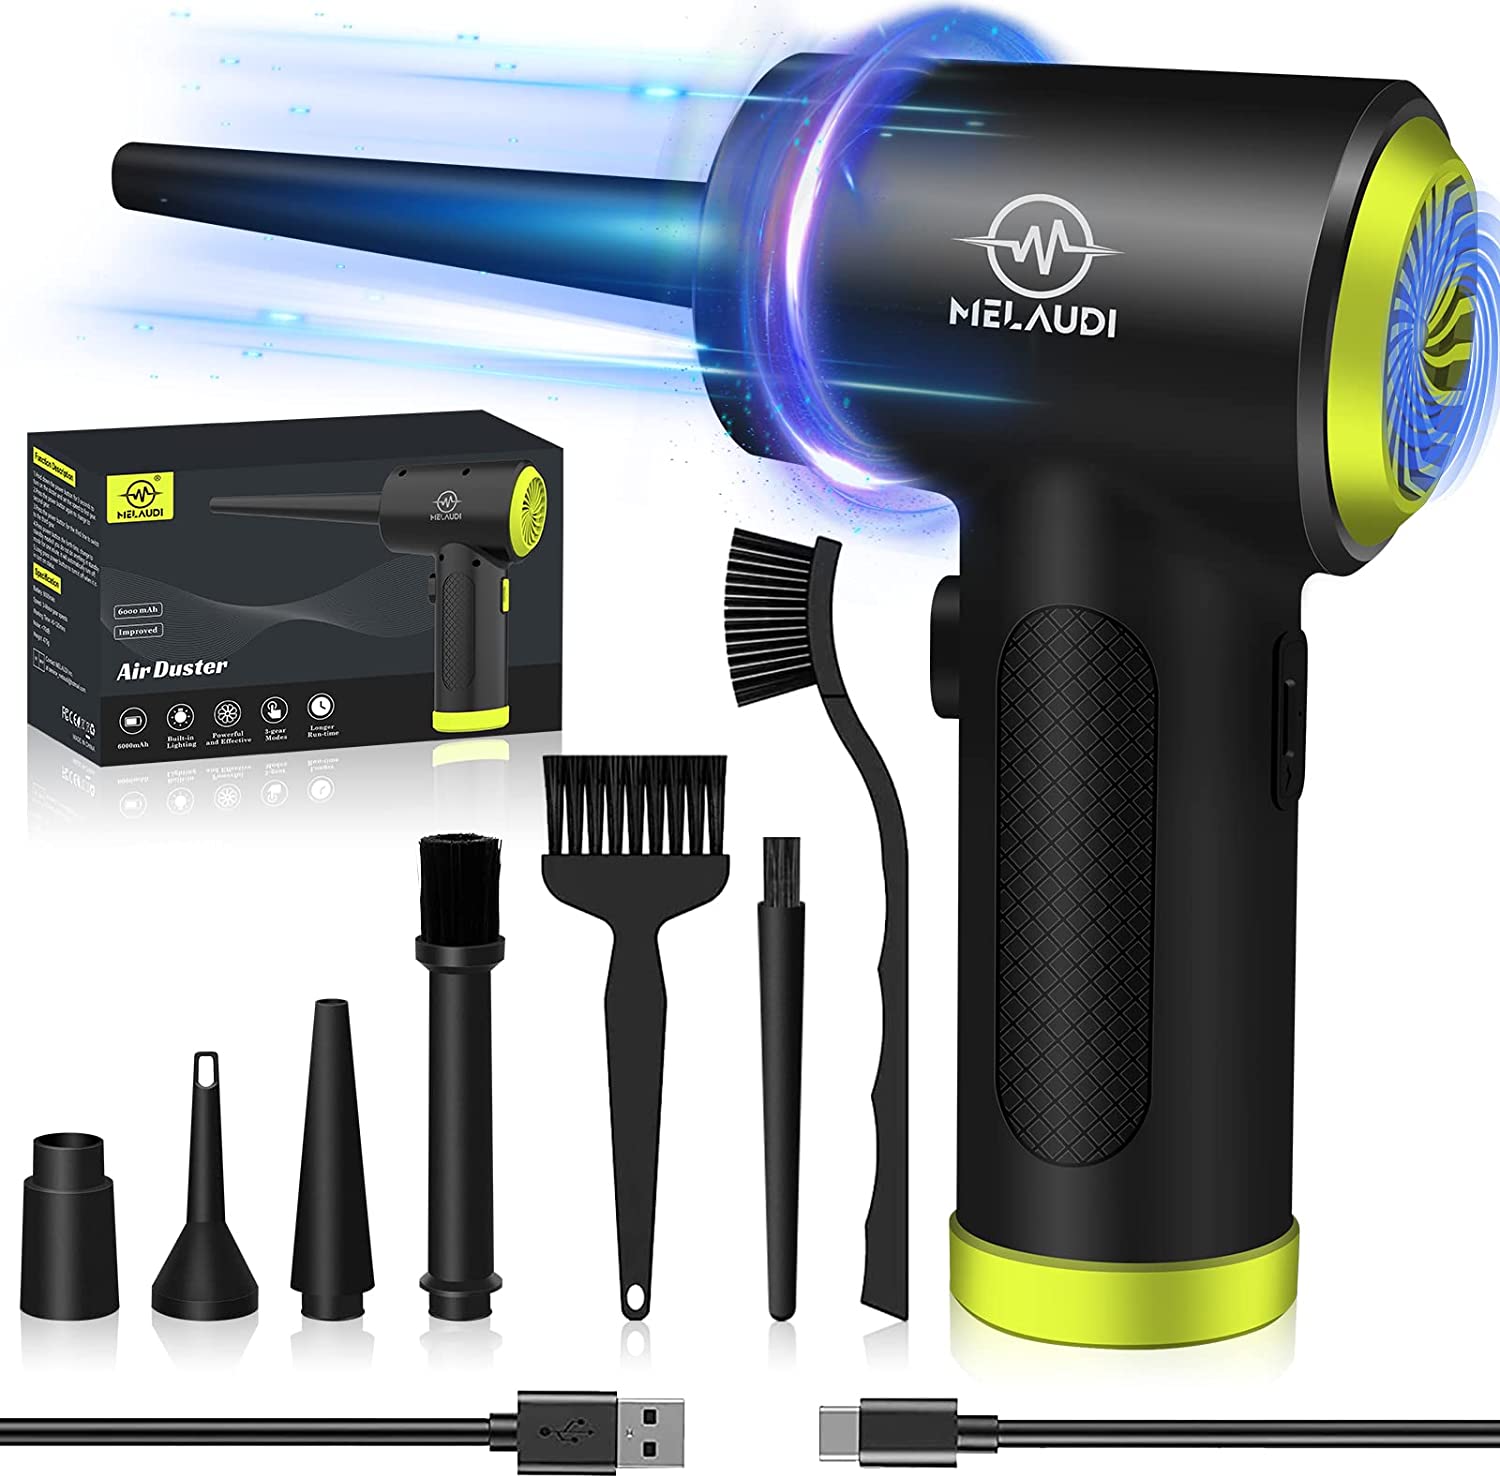 Compressed Air Duster, 3 Speeds Cordless Electric Air Duster with LED Light for Computer Keyboard Cleaning, Enhanced 100000 RPM Air Blower, 6000mAh Rechargeable Battery, New Generation Canned Airs